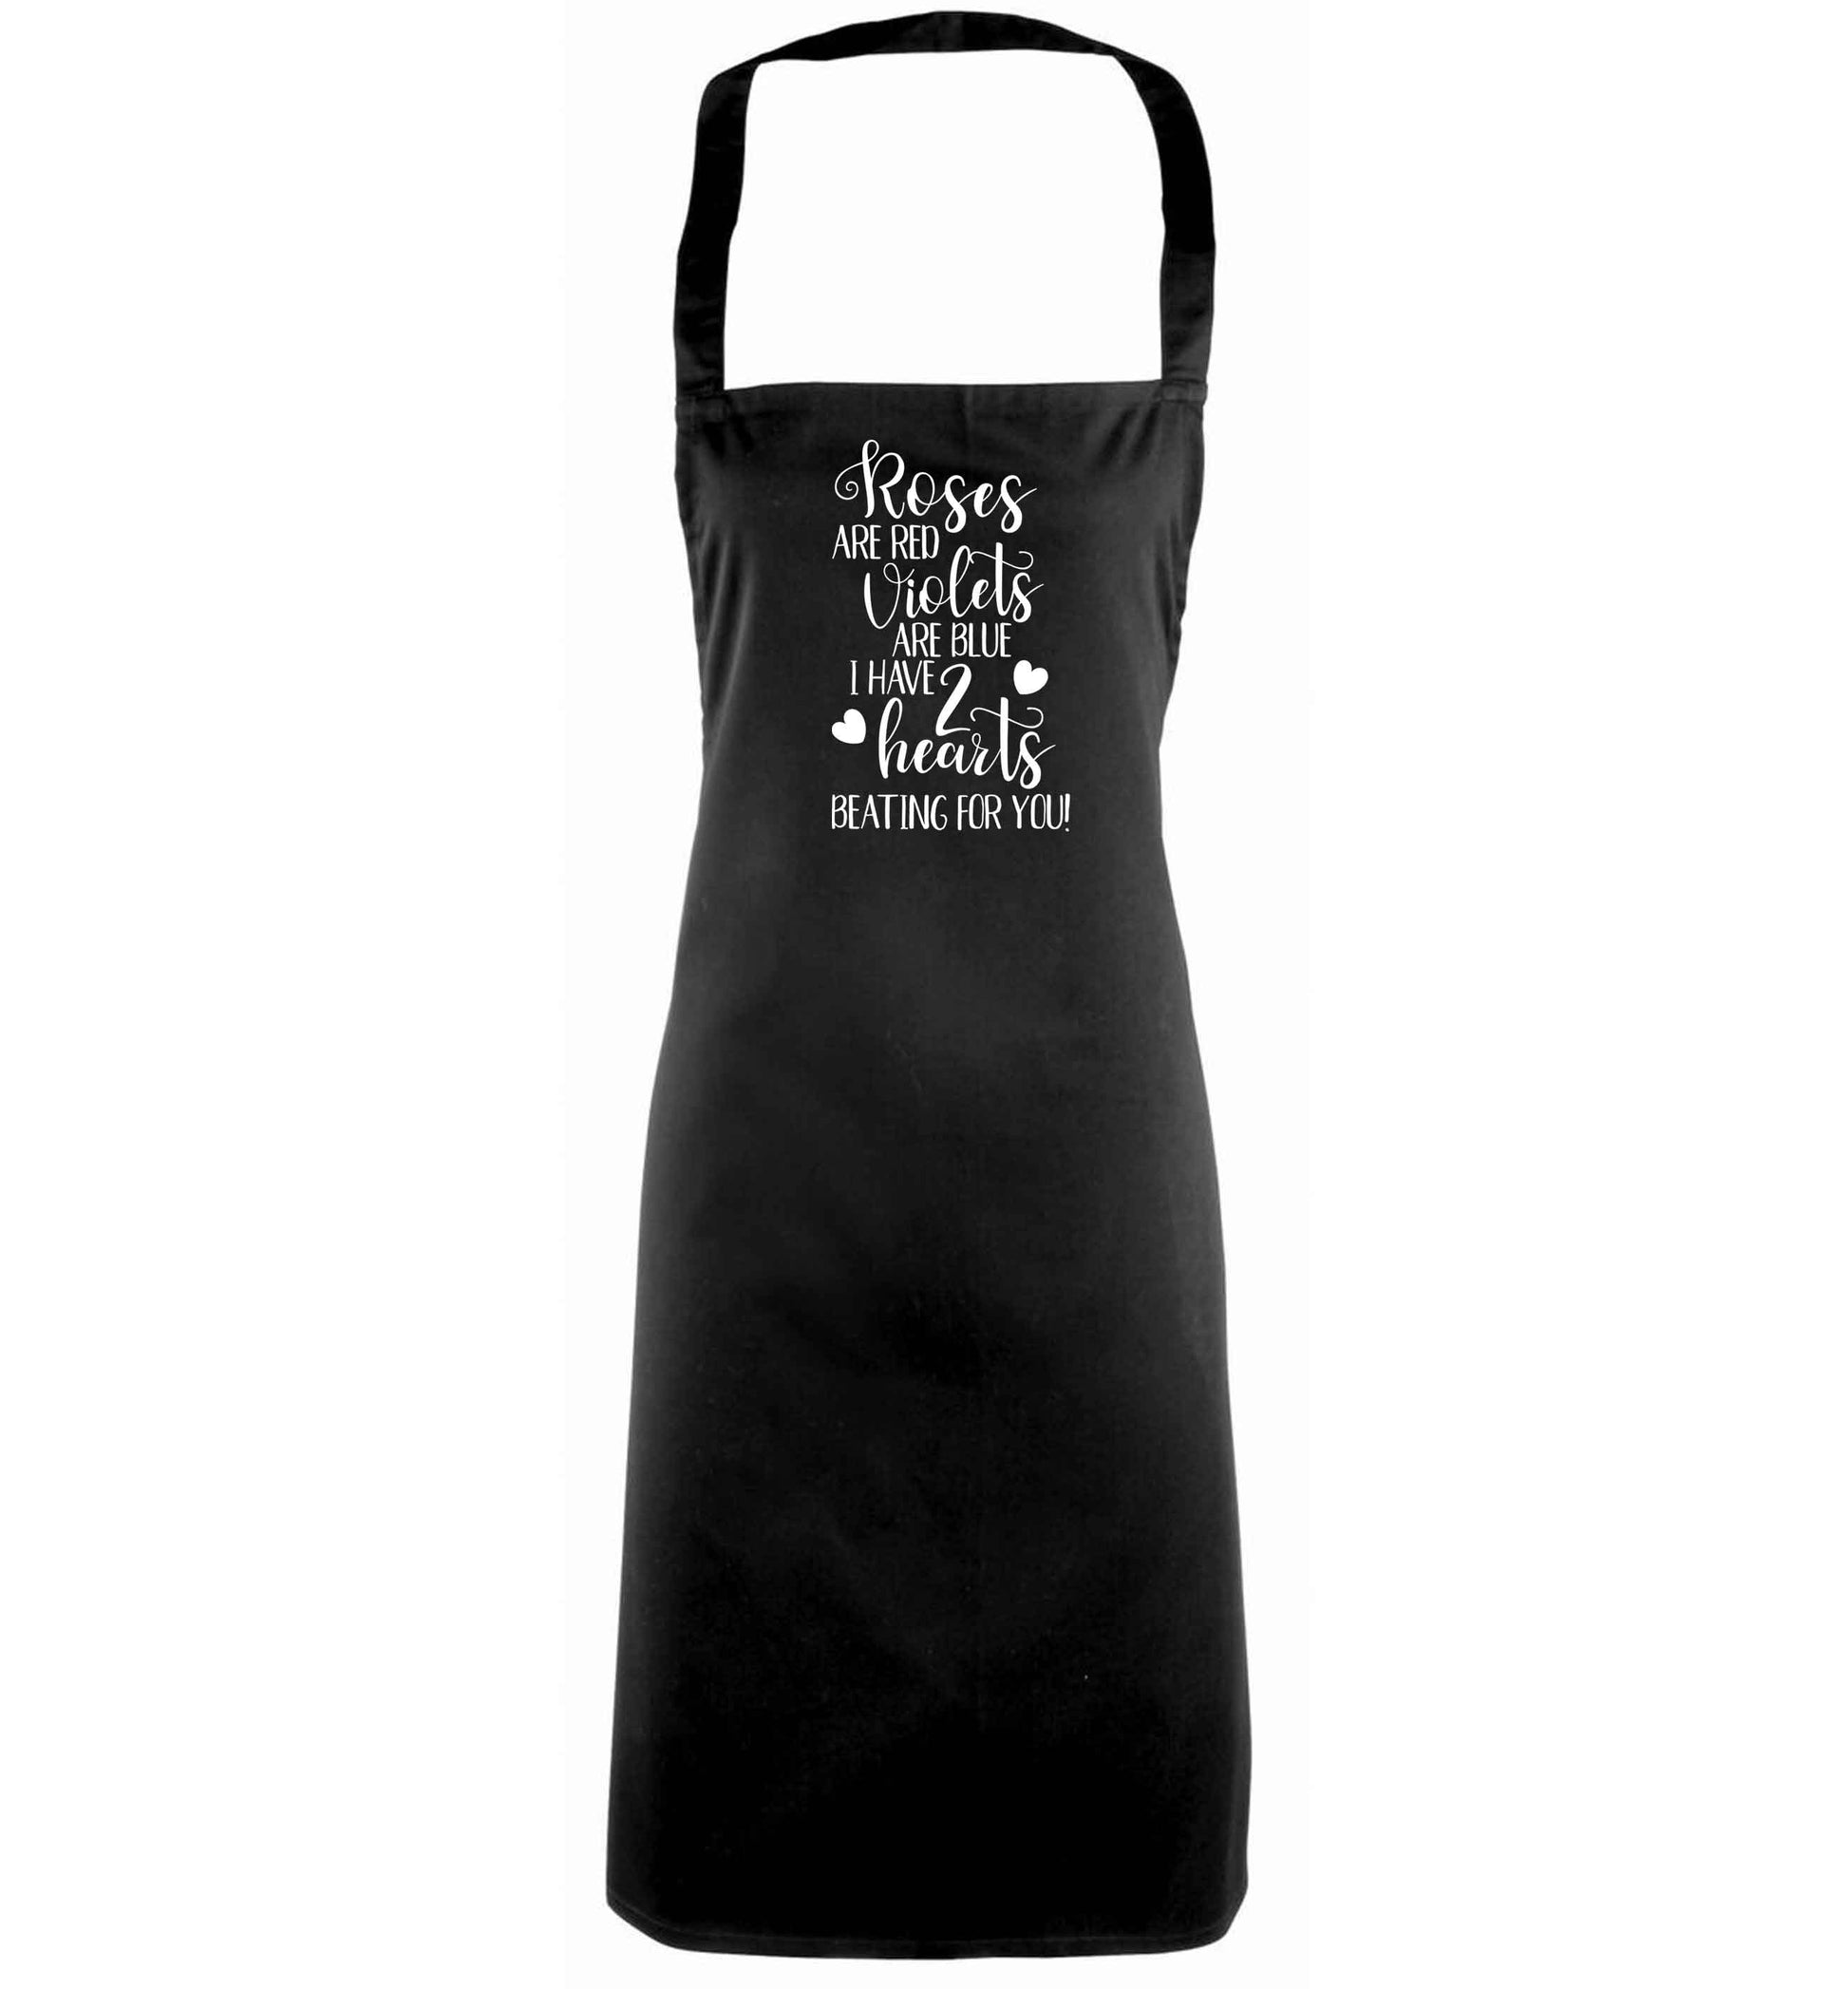 Roses are red violets are blue I have two hearts beating for you black apron